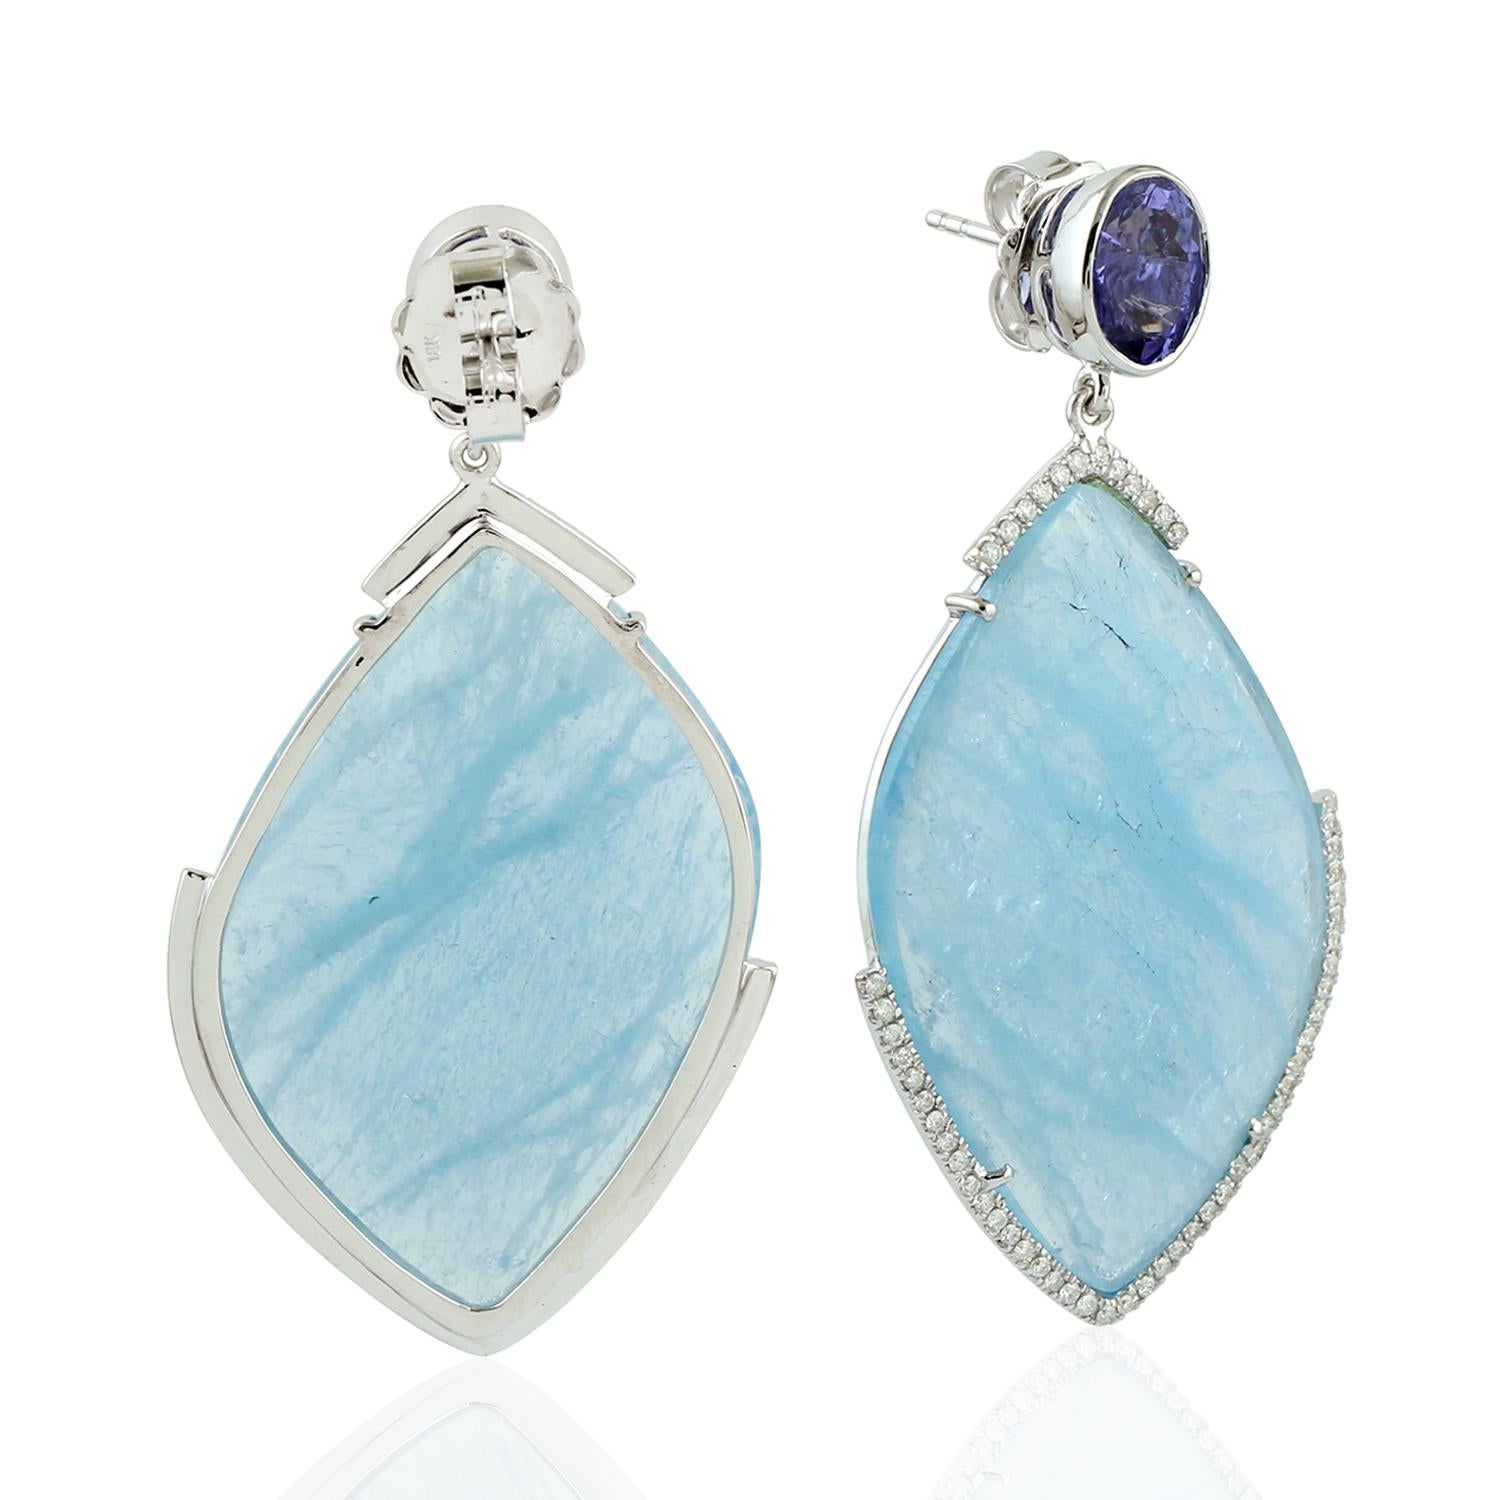 Designer Slice Aquamarine, Tanzanite & Diamond Drop Dangle Earring in 18K White Gold is lovely for gifting to your loved one!

Closure: Push Post

18KT Gold:8.441gms
Diamond:0.58cts
Aquamarine:48.45cts
Tanzanite:4.72cts
